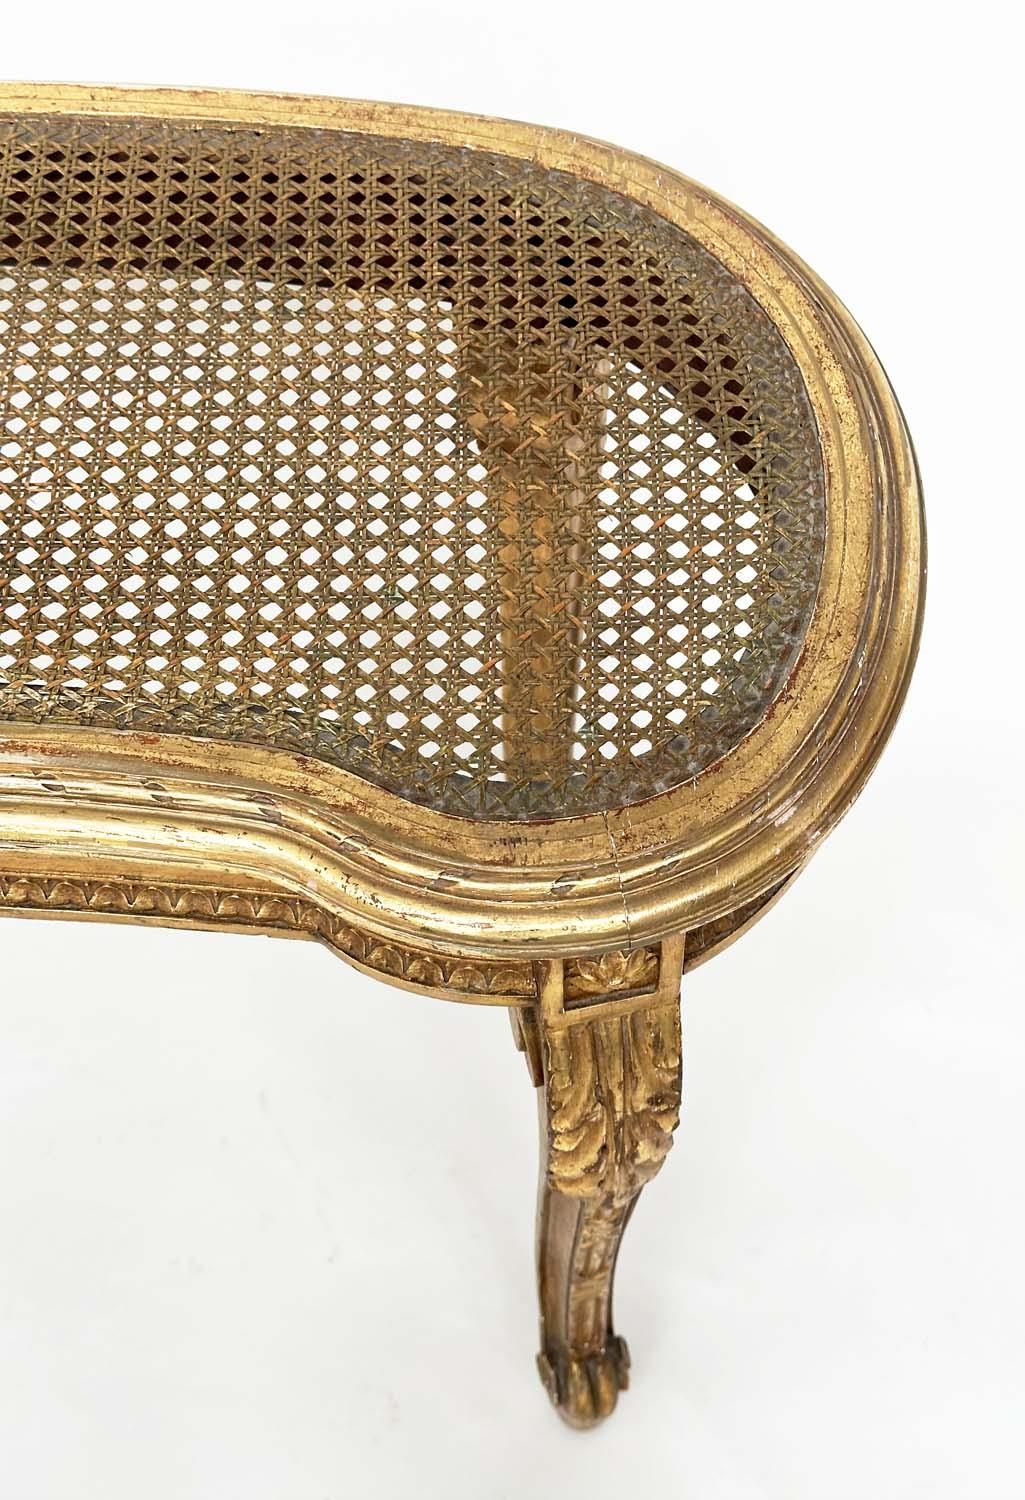 WINDOW SEAT, late 19th century French Louis XVI style giltwood with cane seat and carved tapering - Image 7 of 9